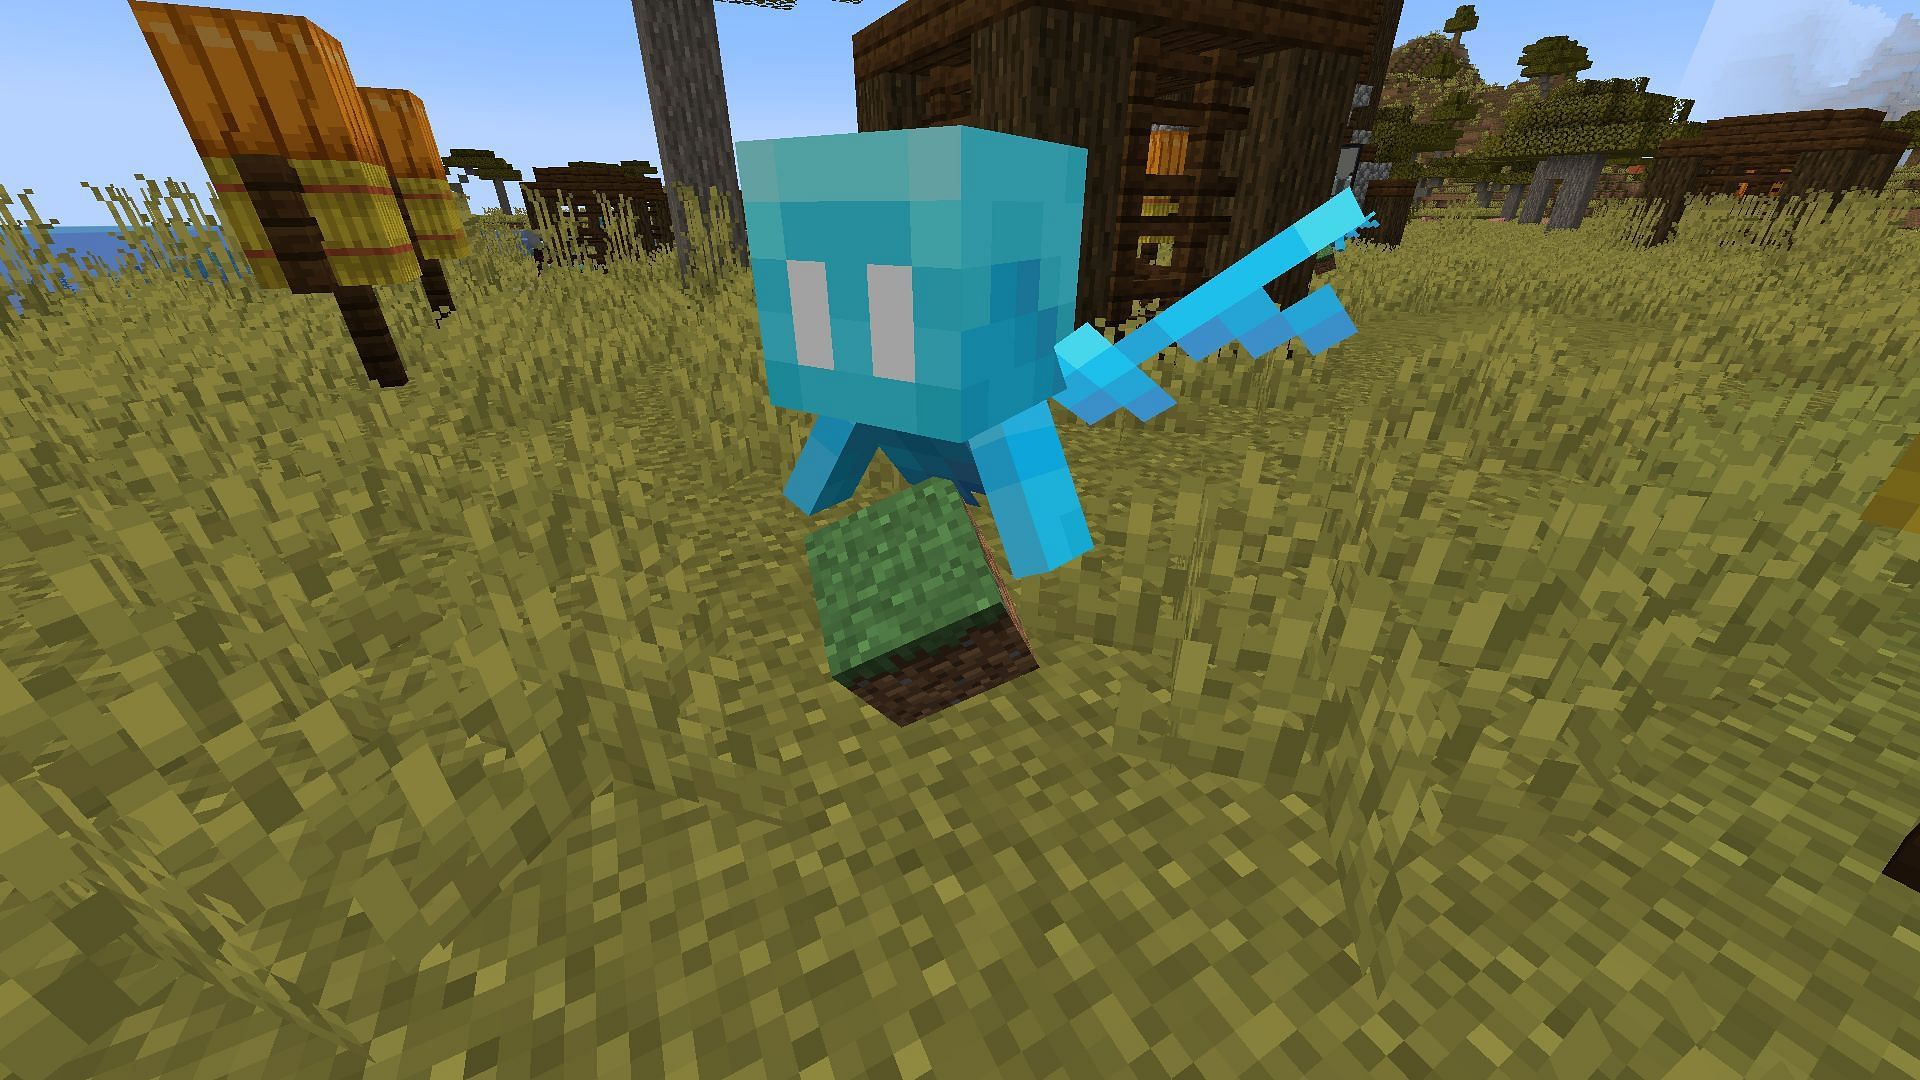 The new mob holding a grass block given by the player (Image via Mojang)